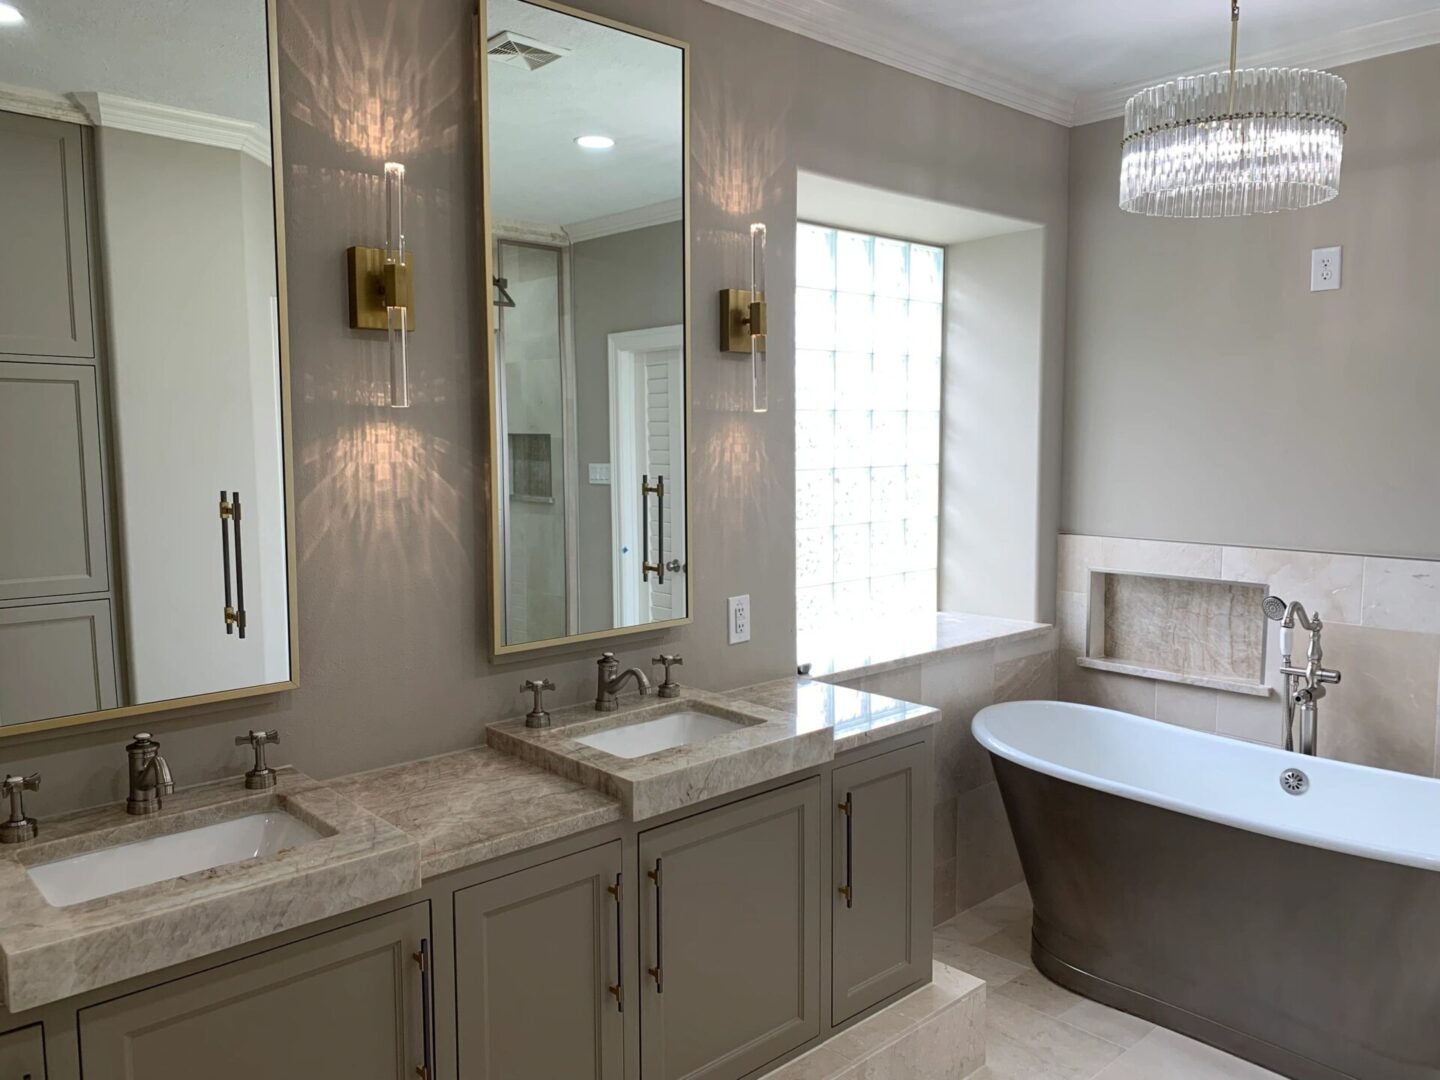 Design a bathroom with two sinks and a tub.